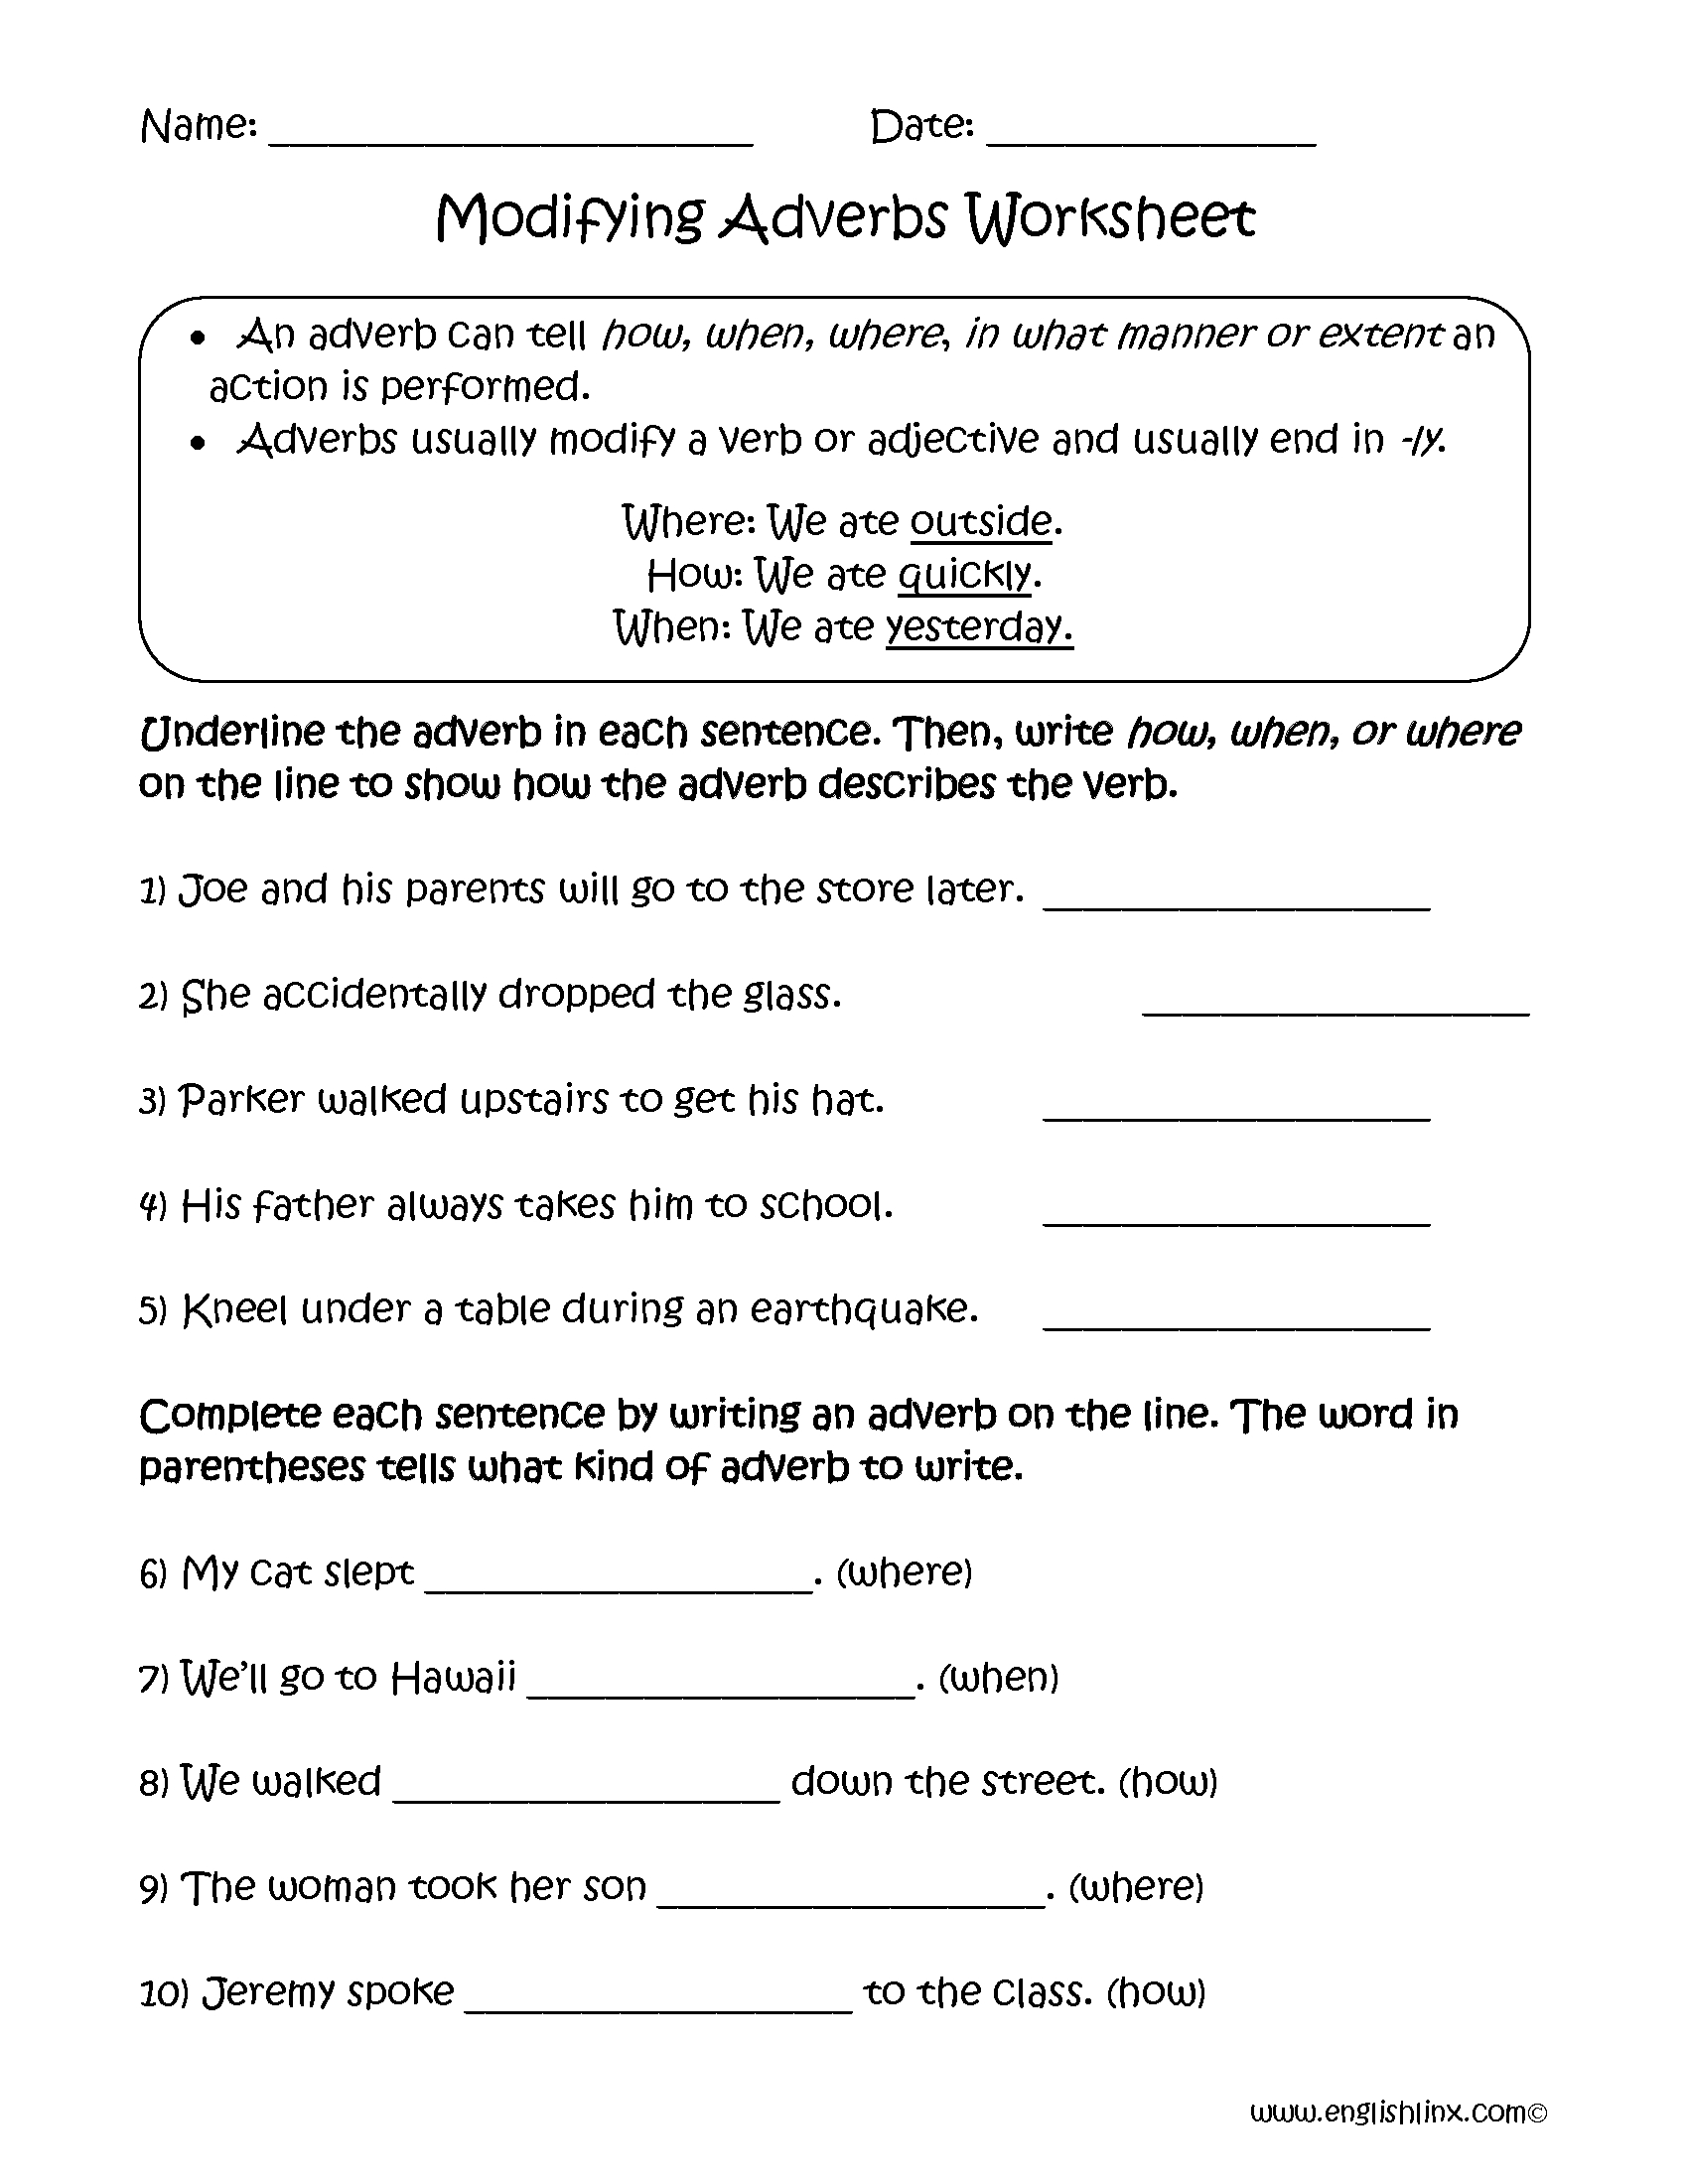 Adjectives And Adverbs Worksheets 8th Grade